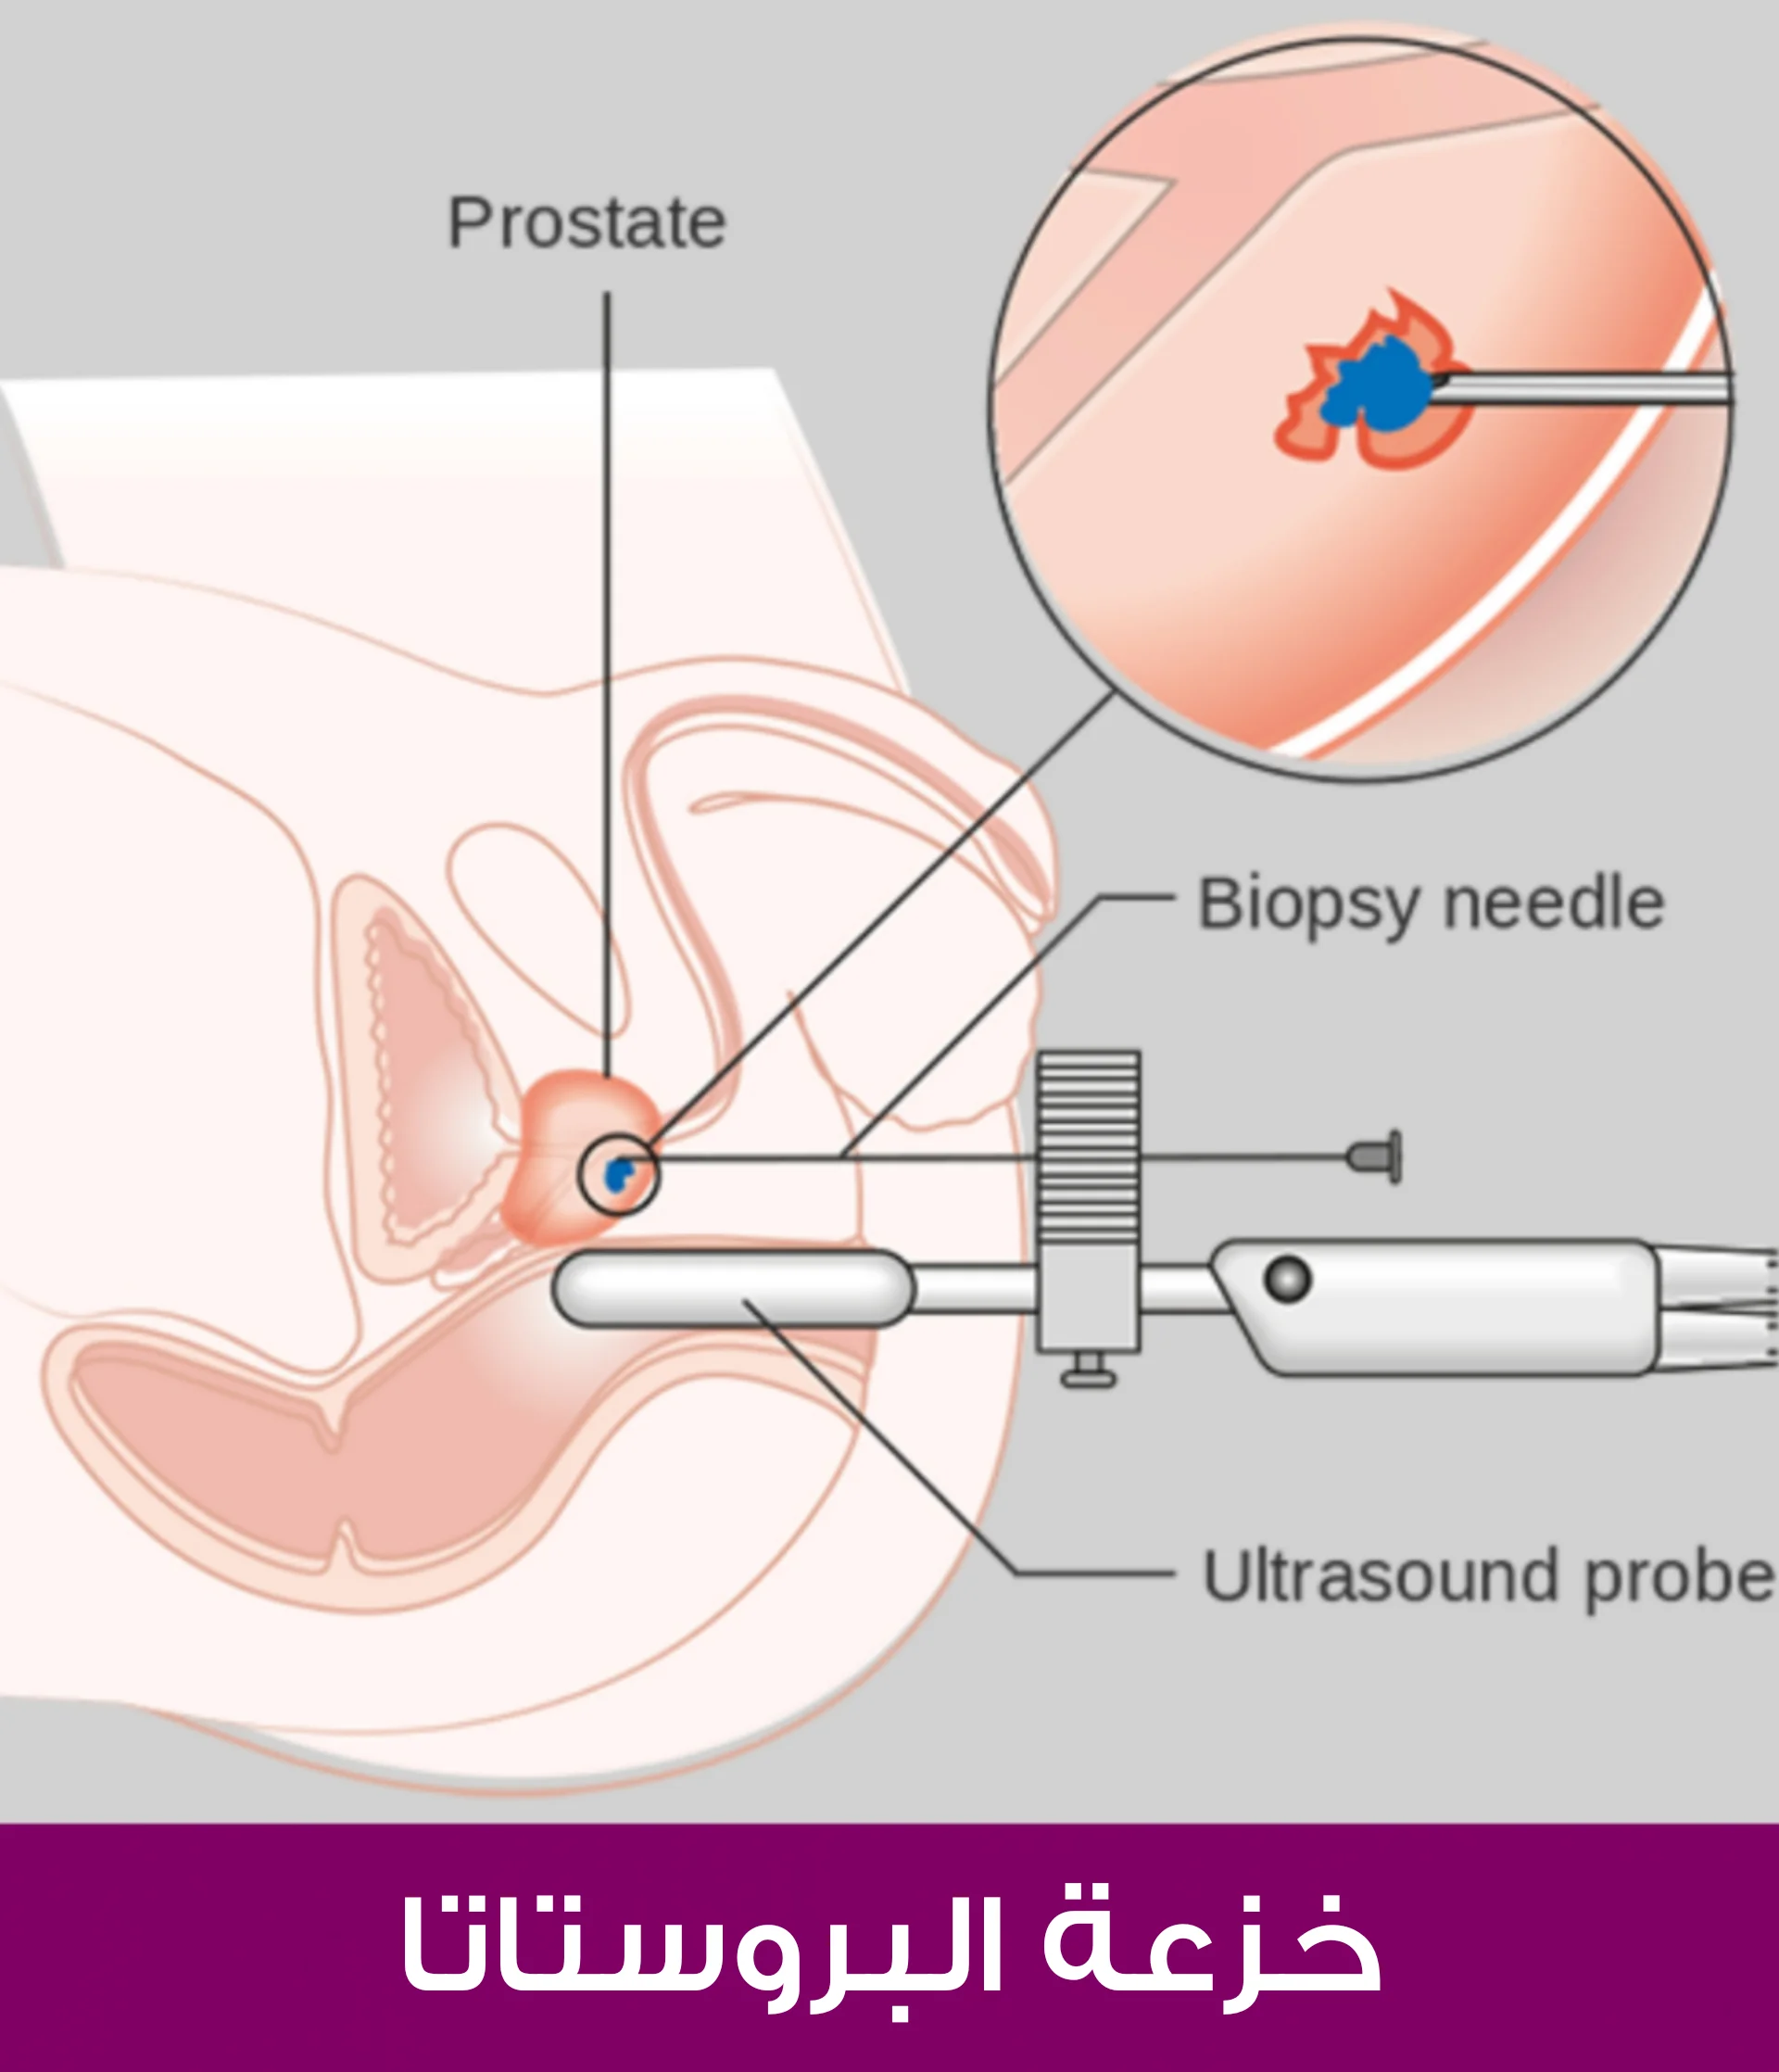 How to take a biopsy of the prostate